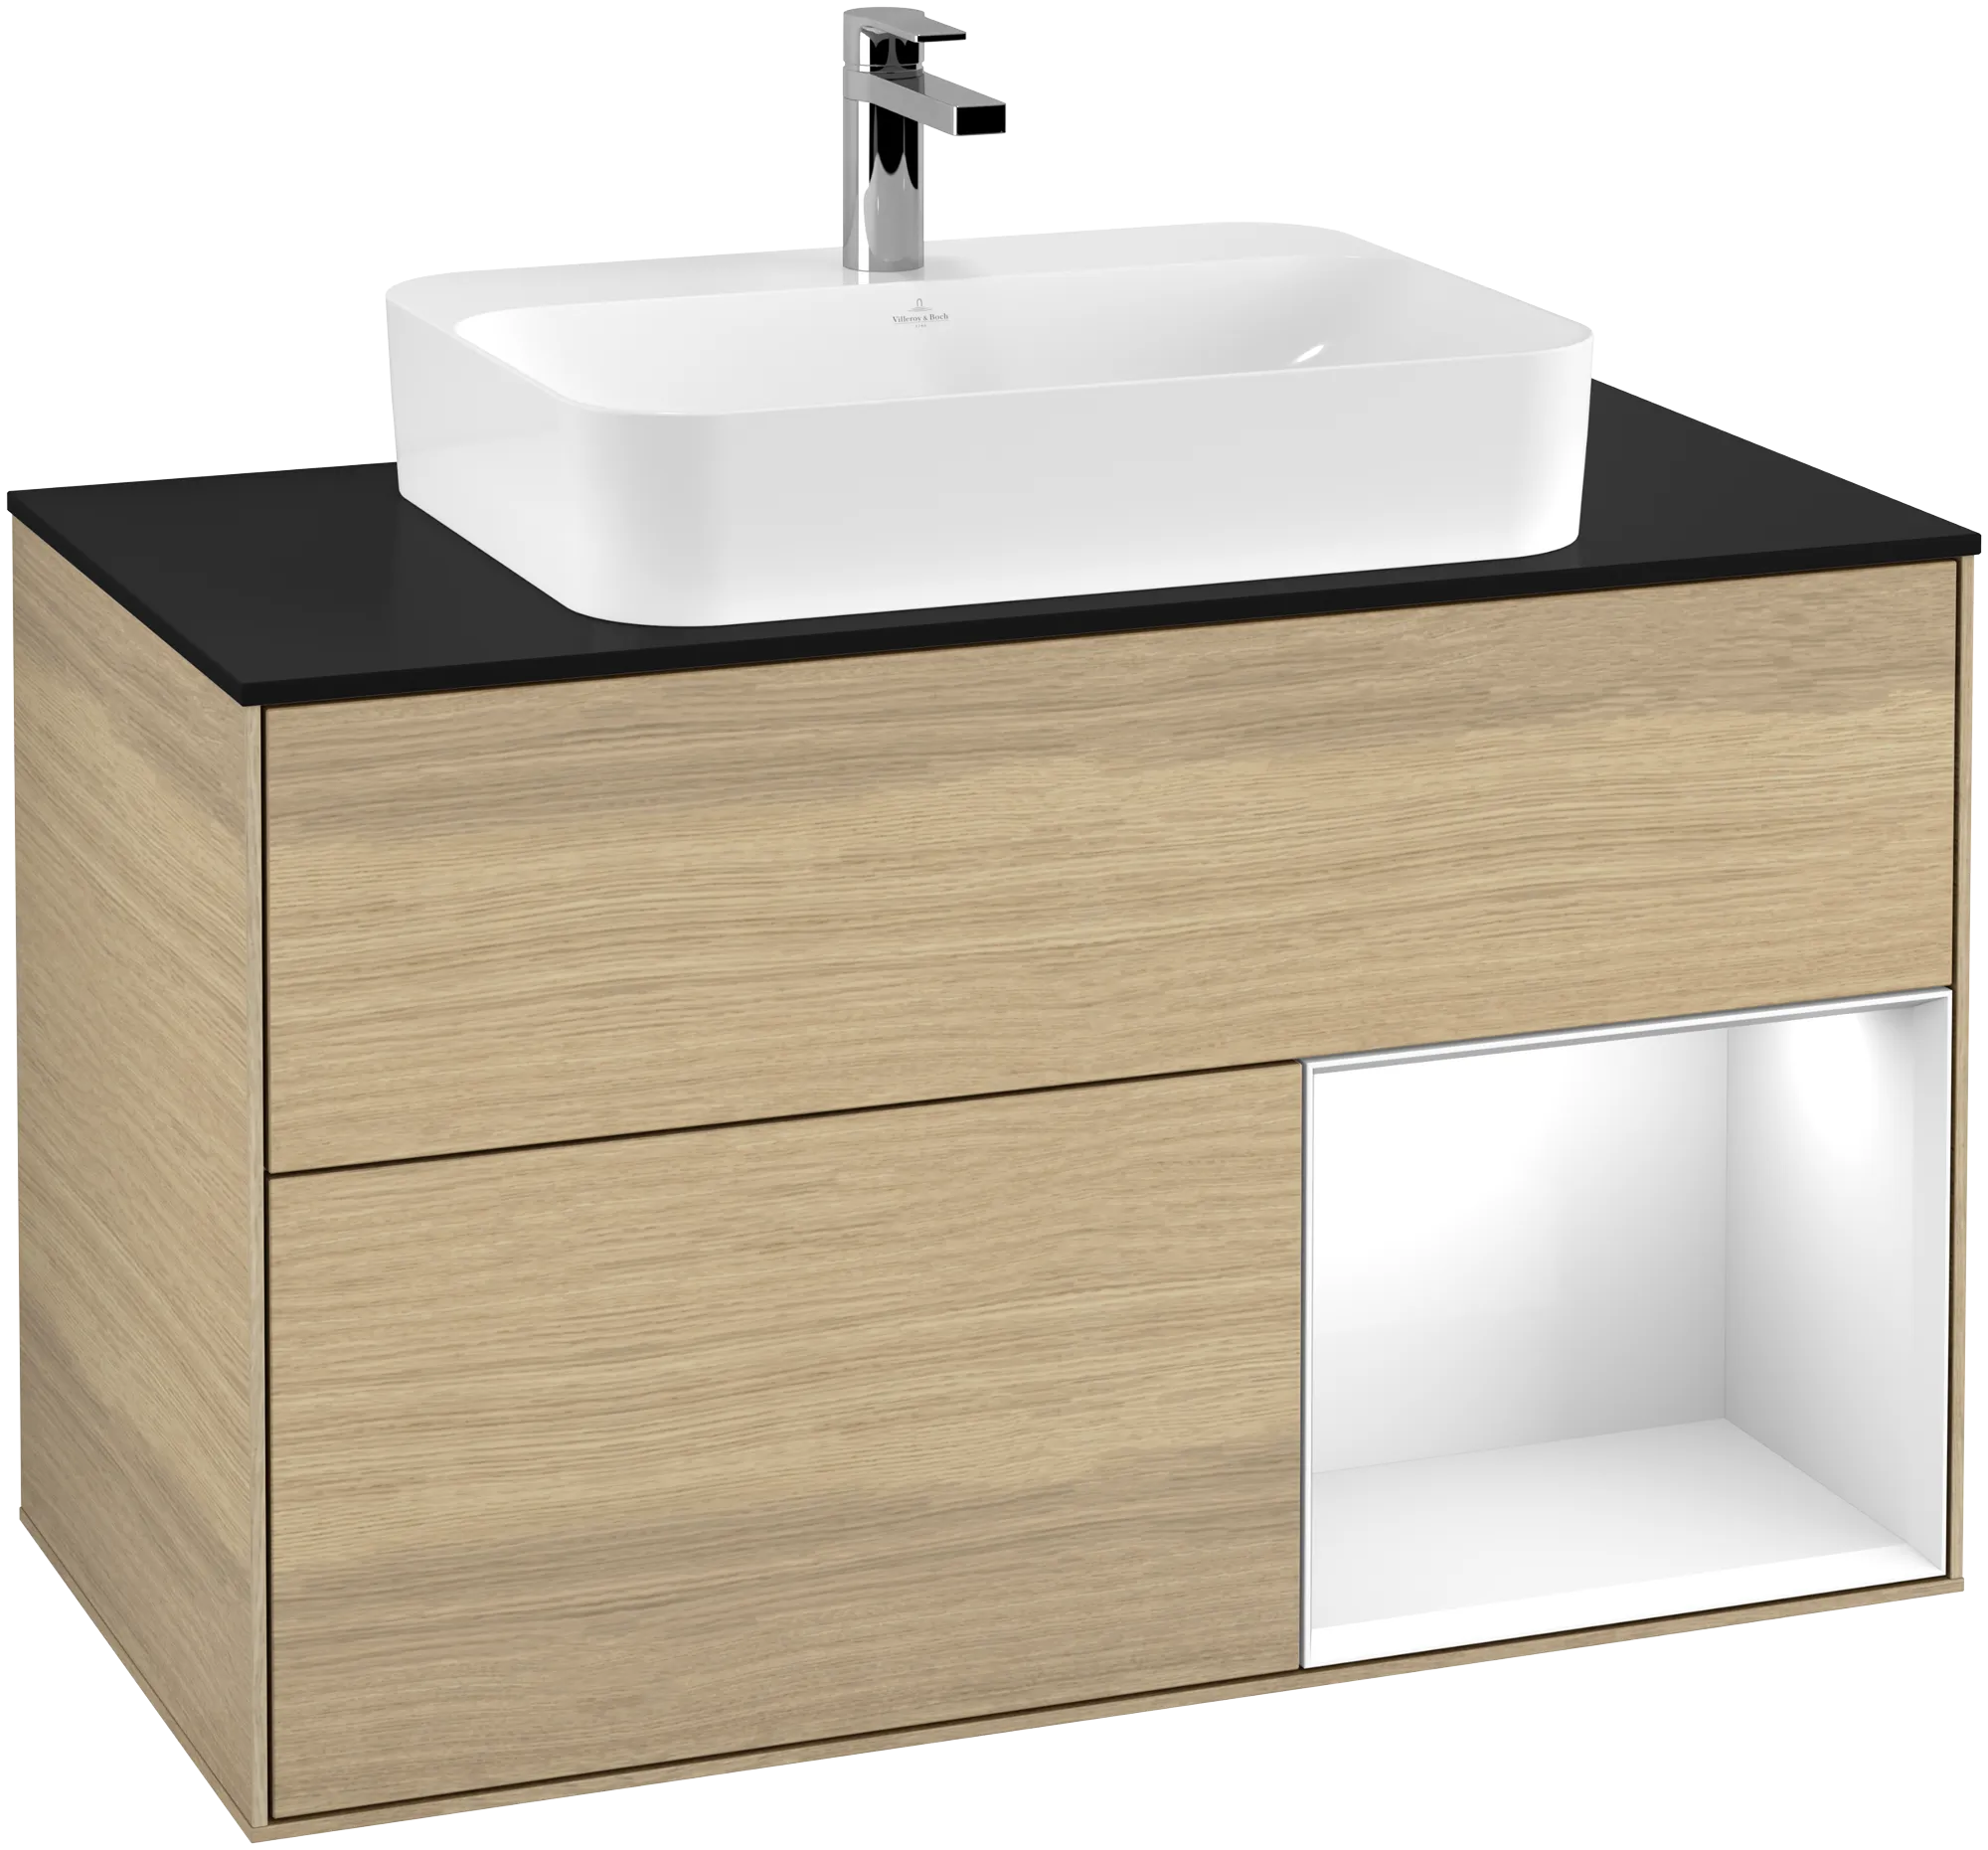 VILLEROY BOCH Finion Vanity unit, with lighting, 2 pull-out compartments, 1000 x 603 x 501 mm, Oak Veneer / Glossy White Lacquer / Glass Black Matt #G372GFPC resmi